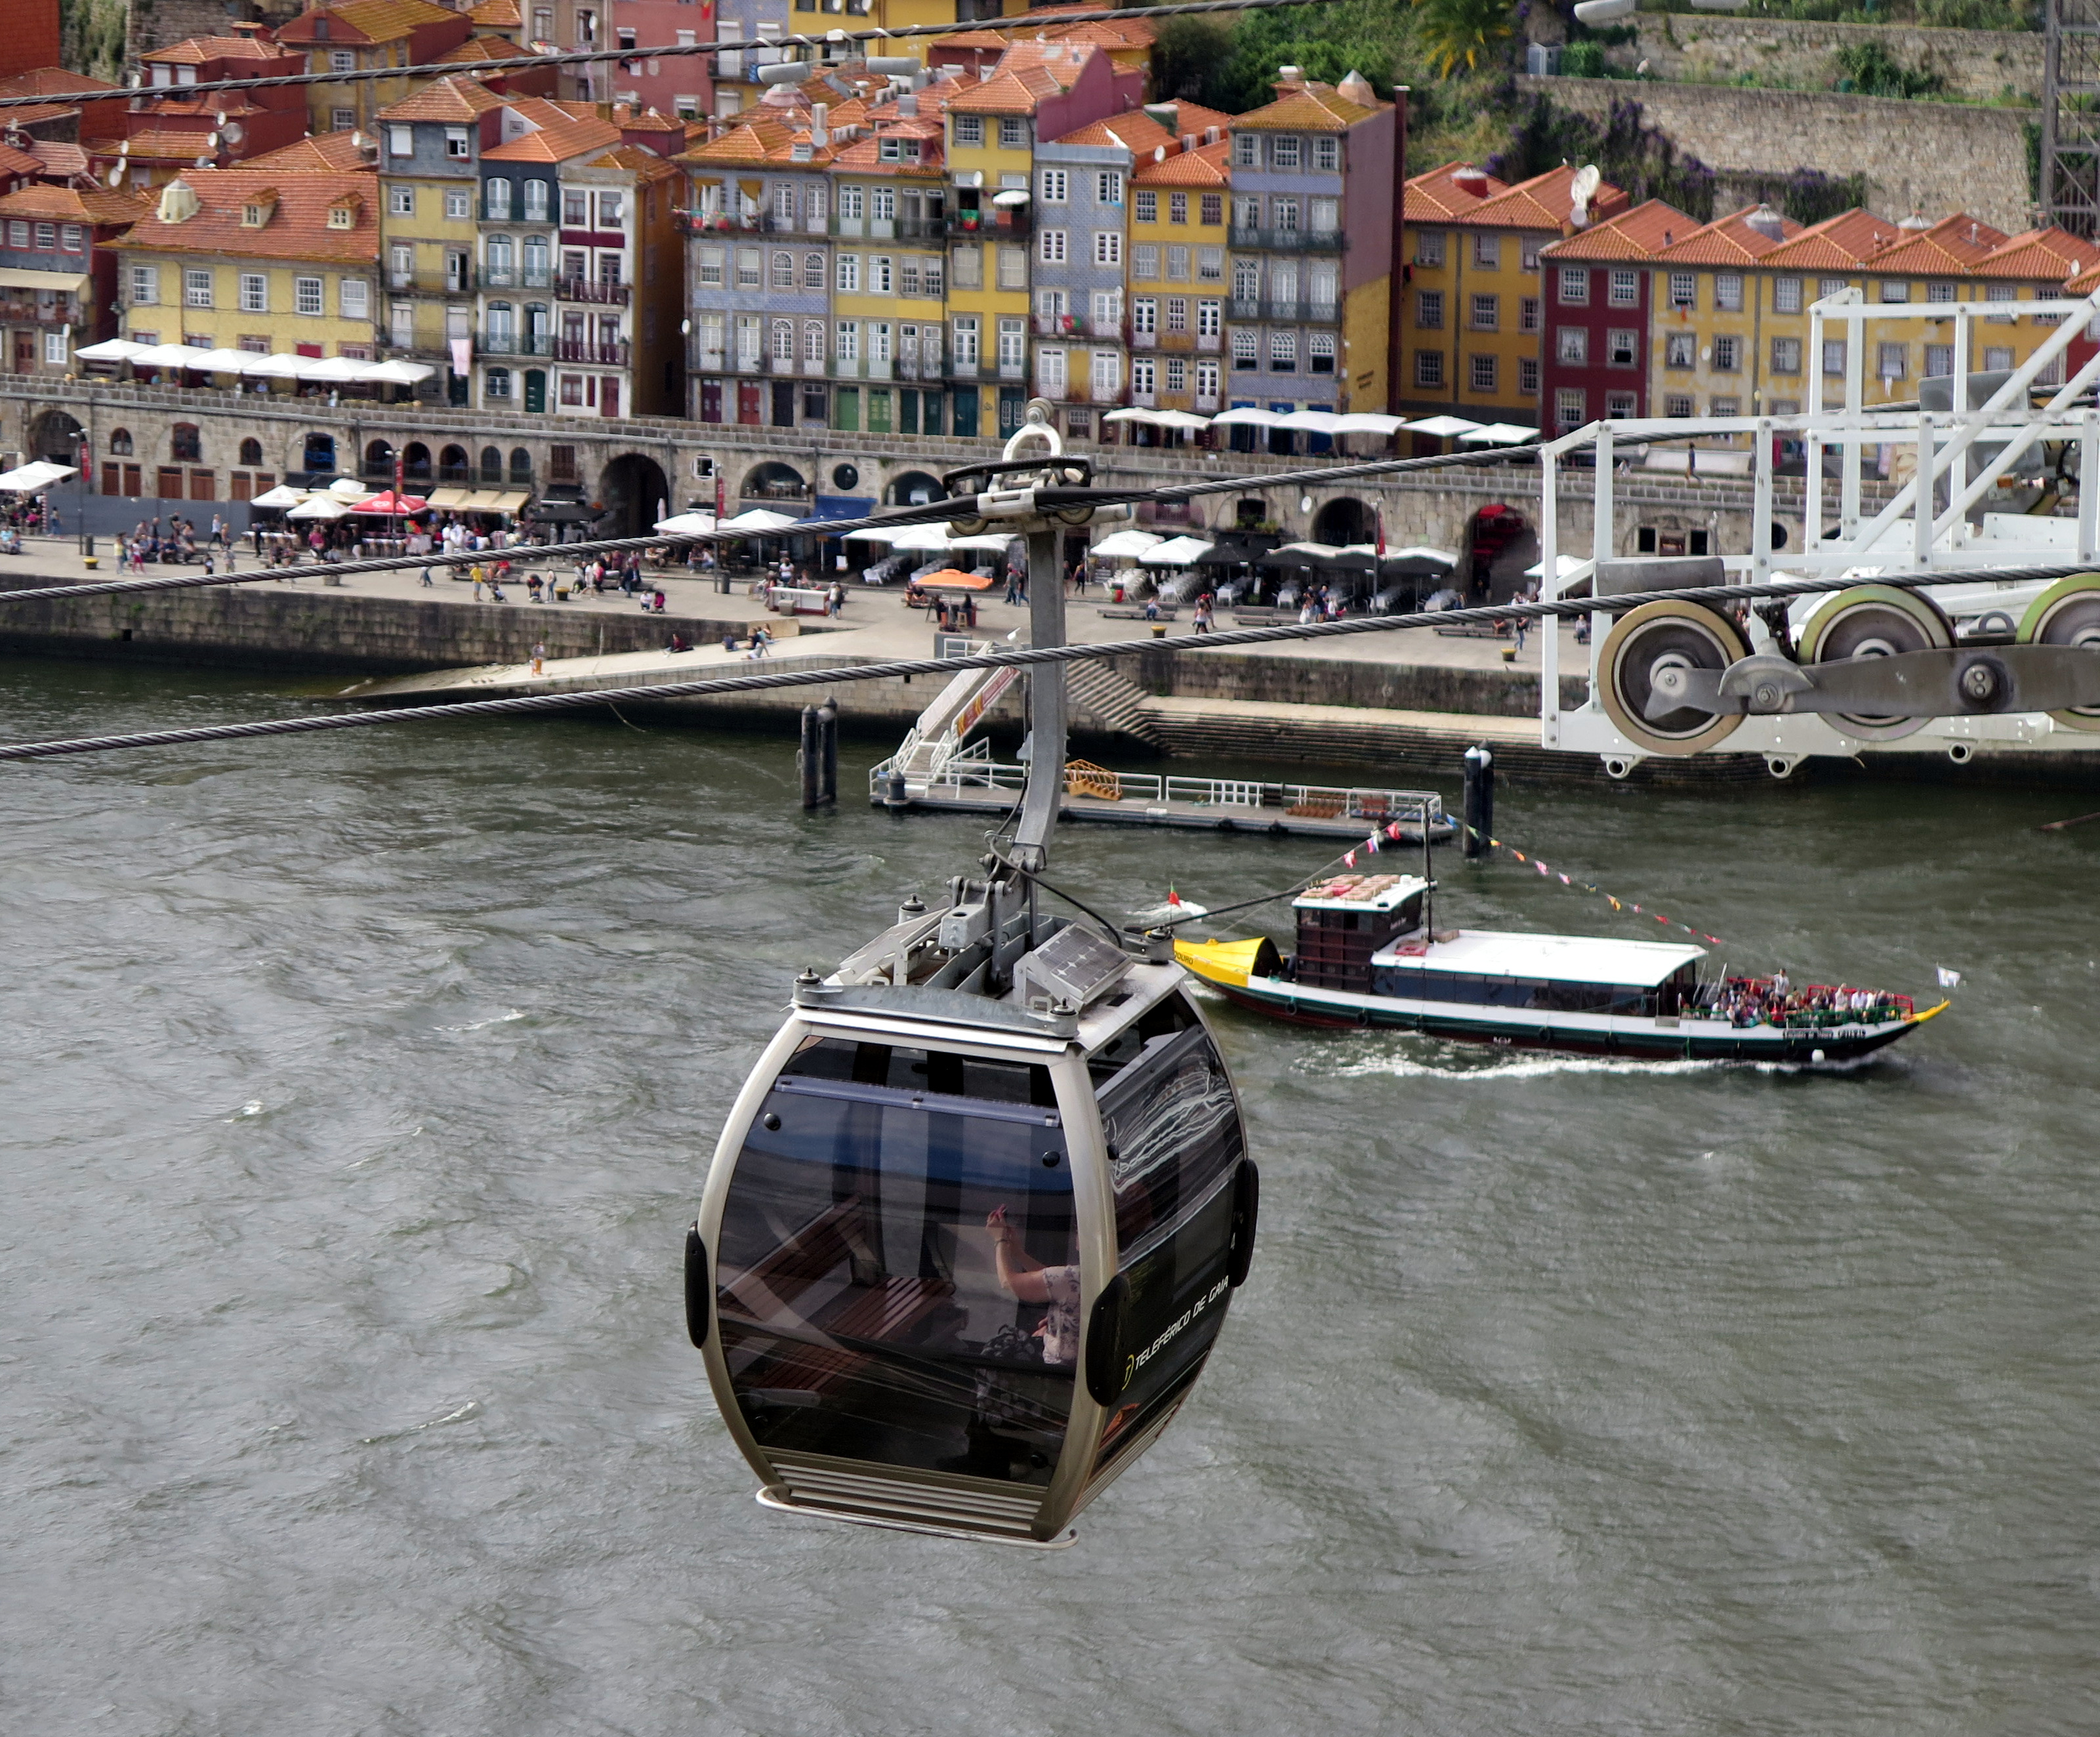 A dramatic riverfront that includes cable cars, river boats and Ponte Luiz I bridge are reasons why Porto is the Portuguese city you shouldn't miss